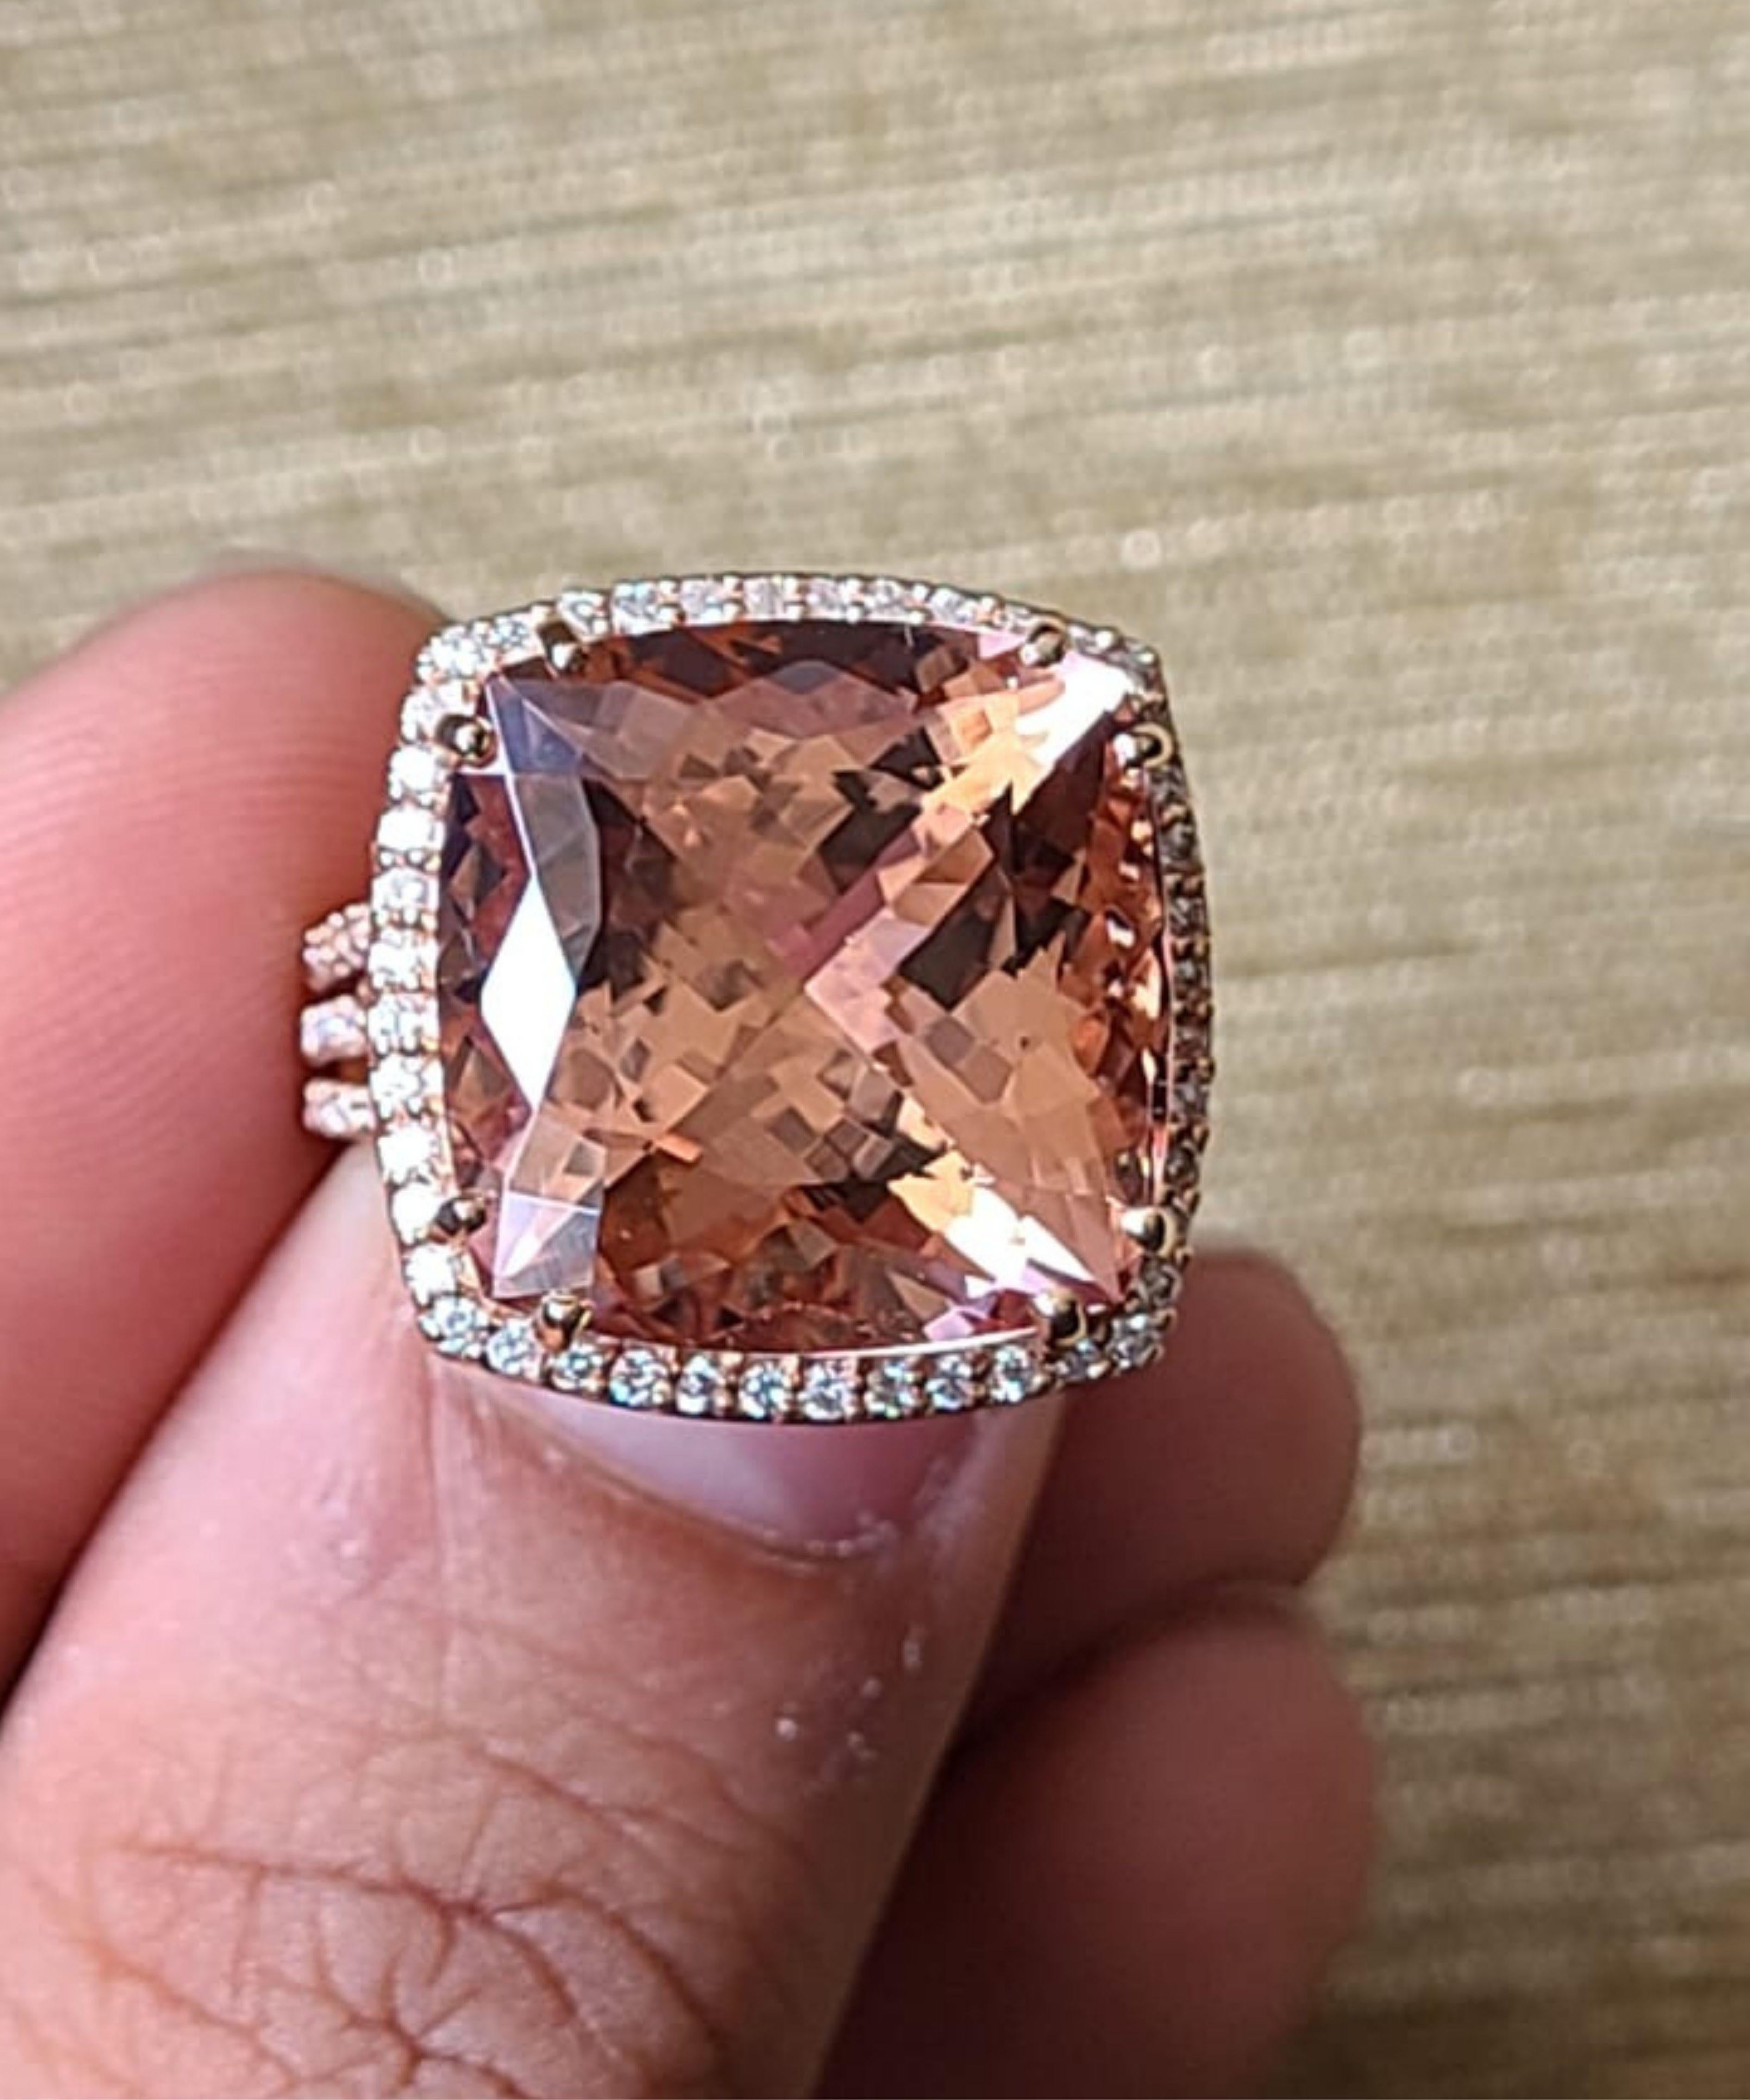 A very gorgeous and one of a kind, Morganite Engagement / Cocktail Ring set in 18K Rose Gold & Diamonds. The weight of the Morganite is 15.96 carats. The Morganite is peach in colour and is natural, without any treatment. The weight of the Diamonds